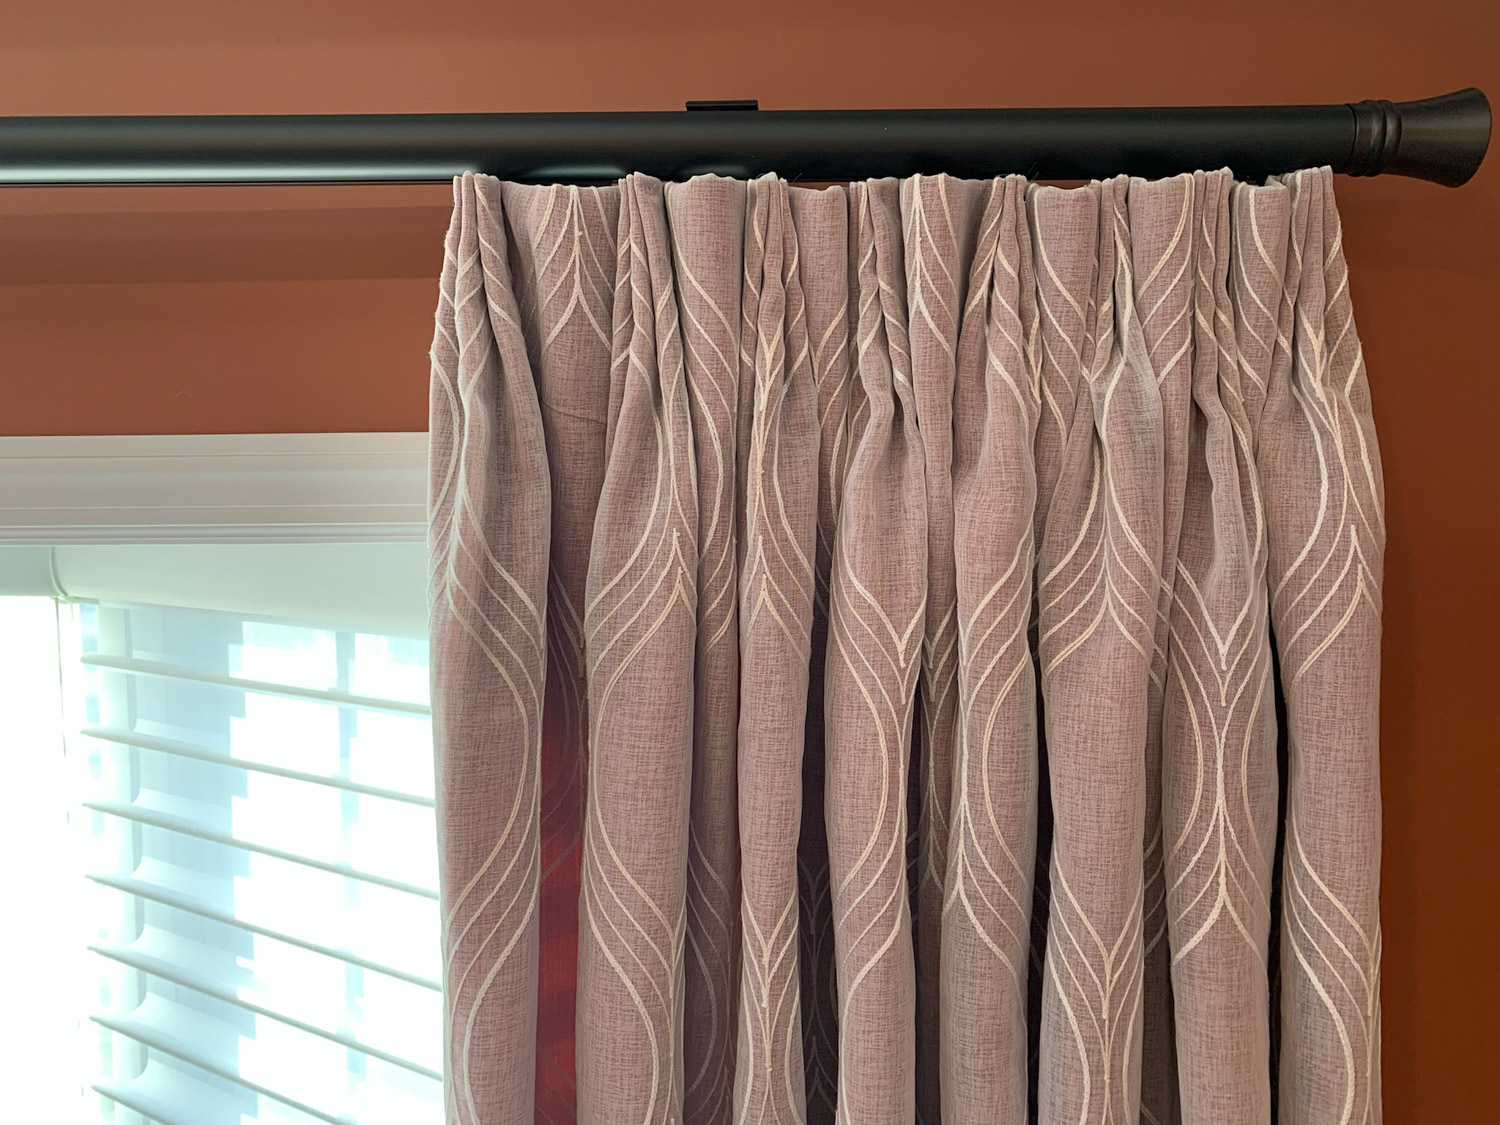 Sheer curtains with inverted pleat, allowing soft light to filter through the fabric.